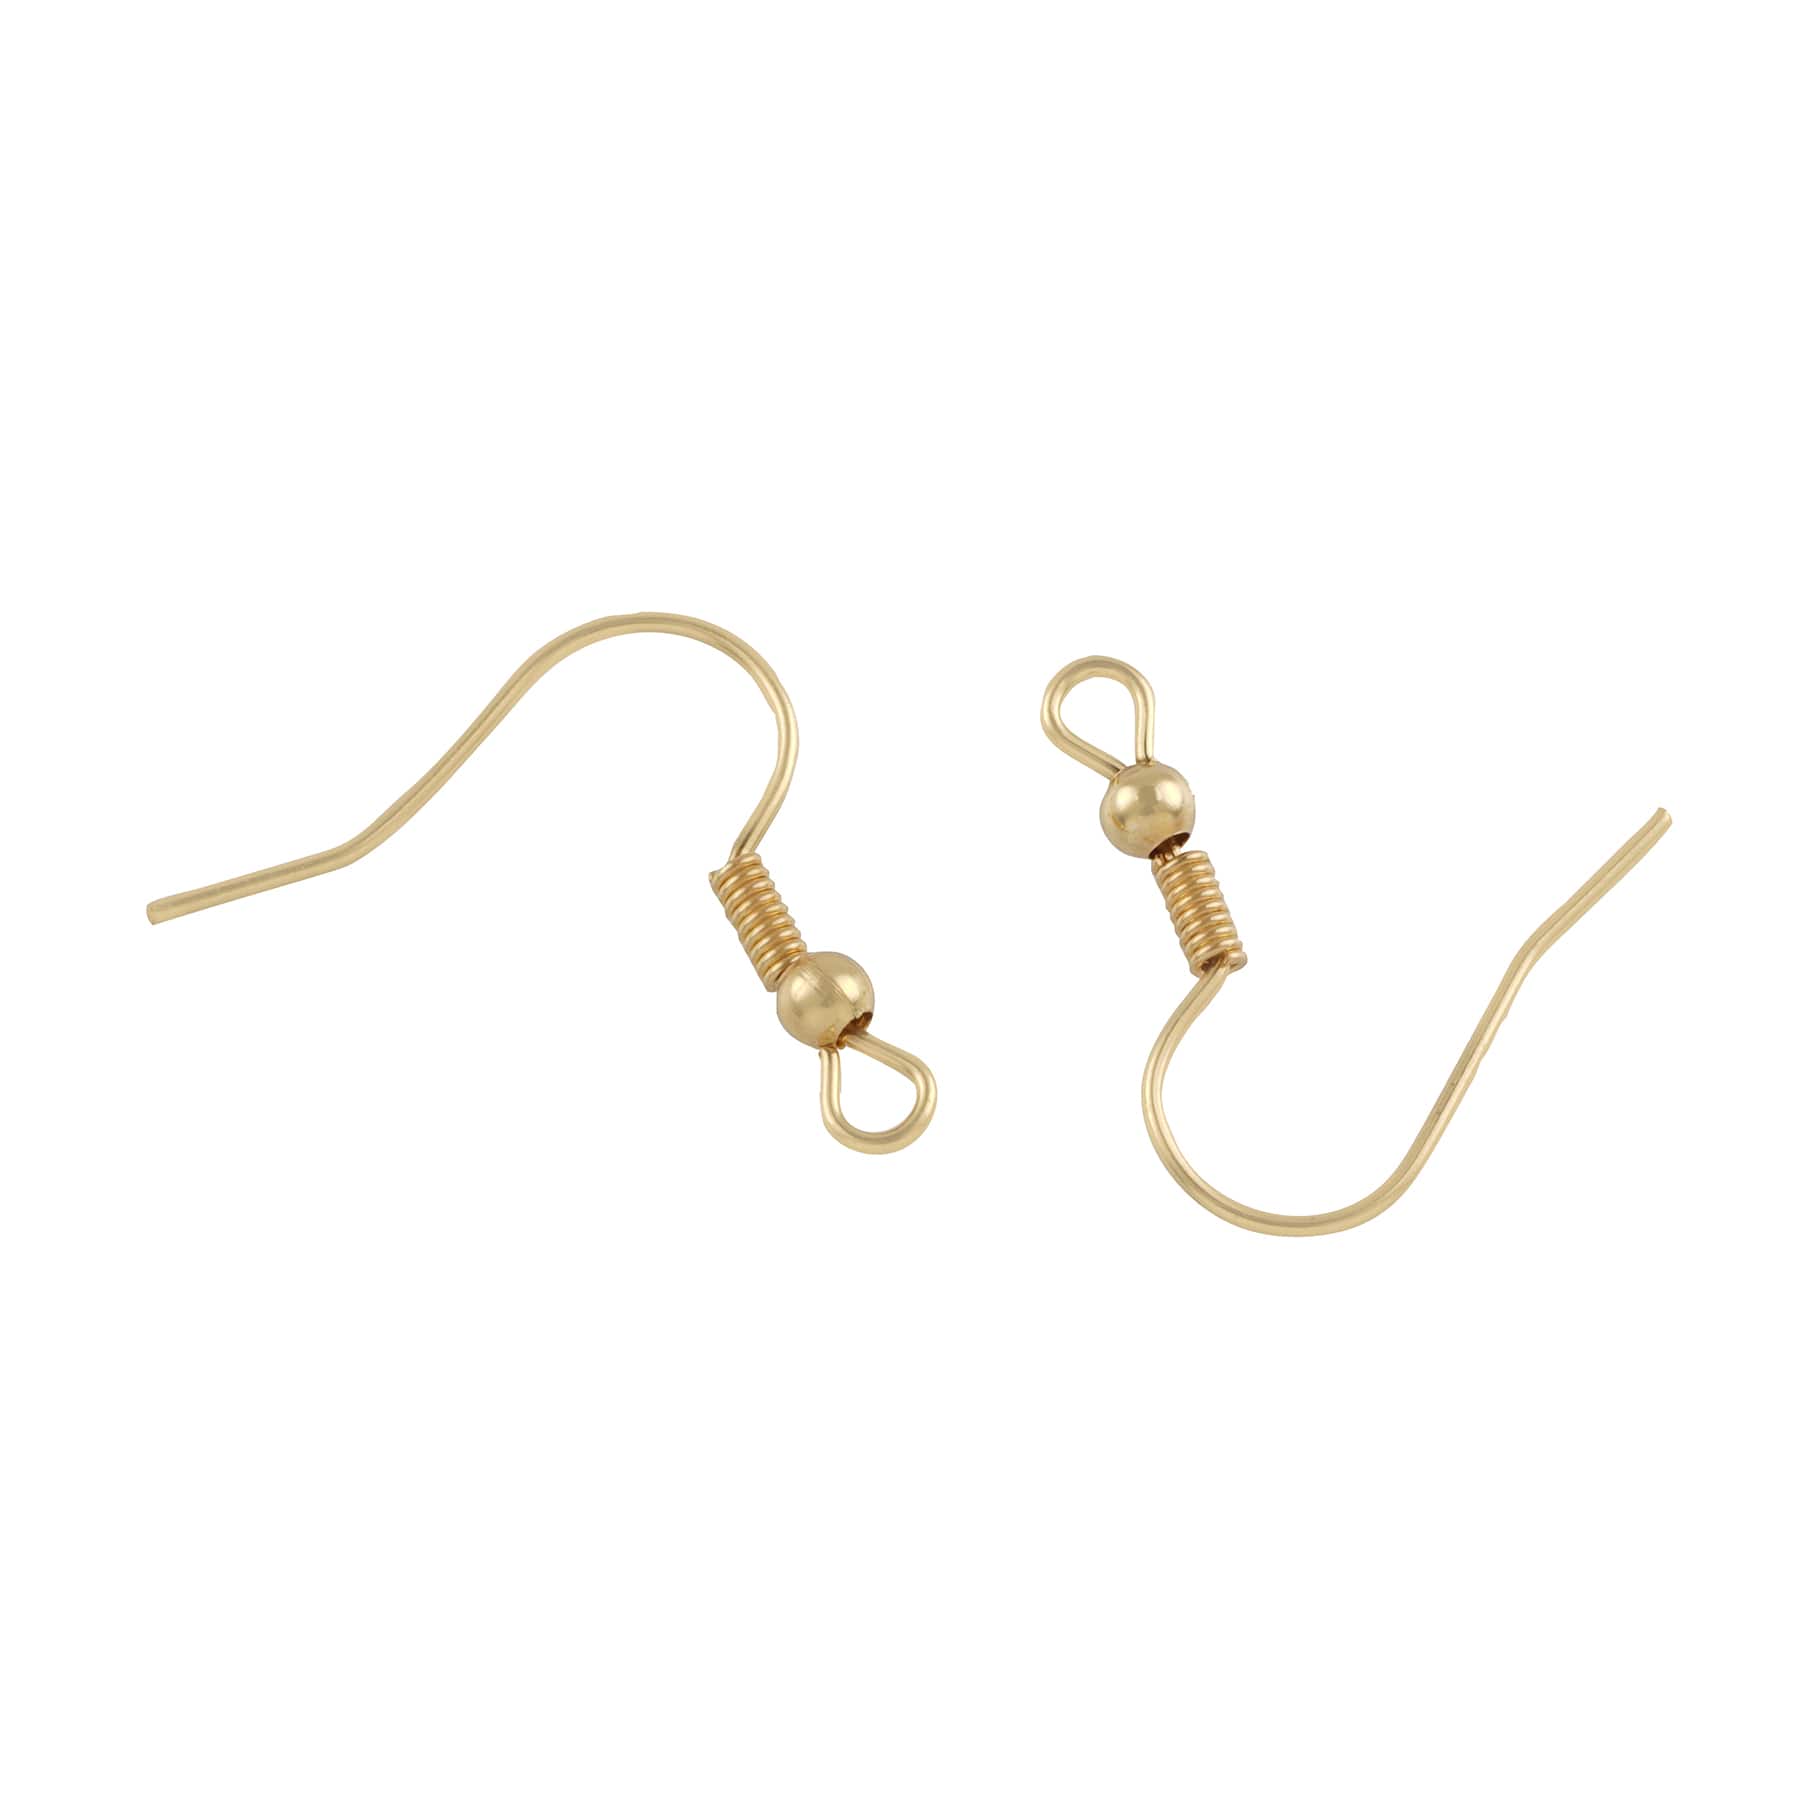 Buy in Bulk - 12 Packs: 120 ct. (1,440 total) 10mm Fish Hooks with Coil by  Bead Landing™